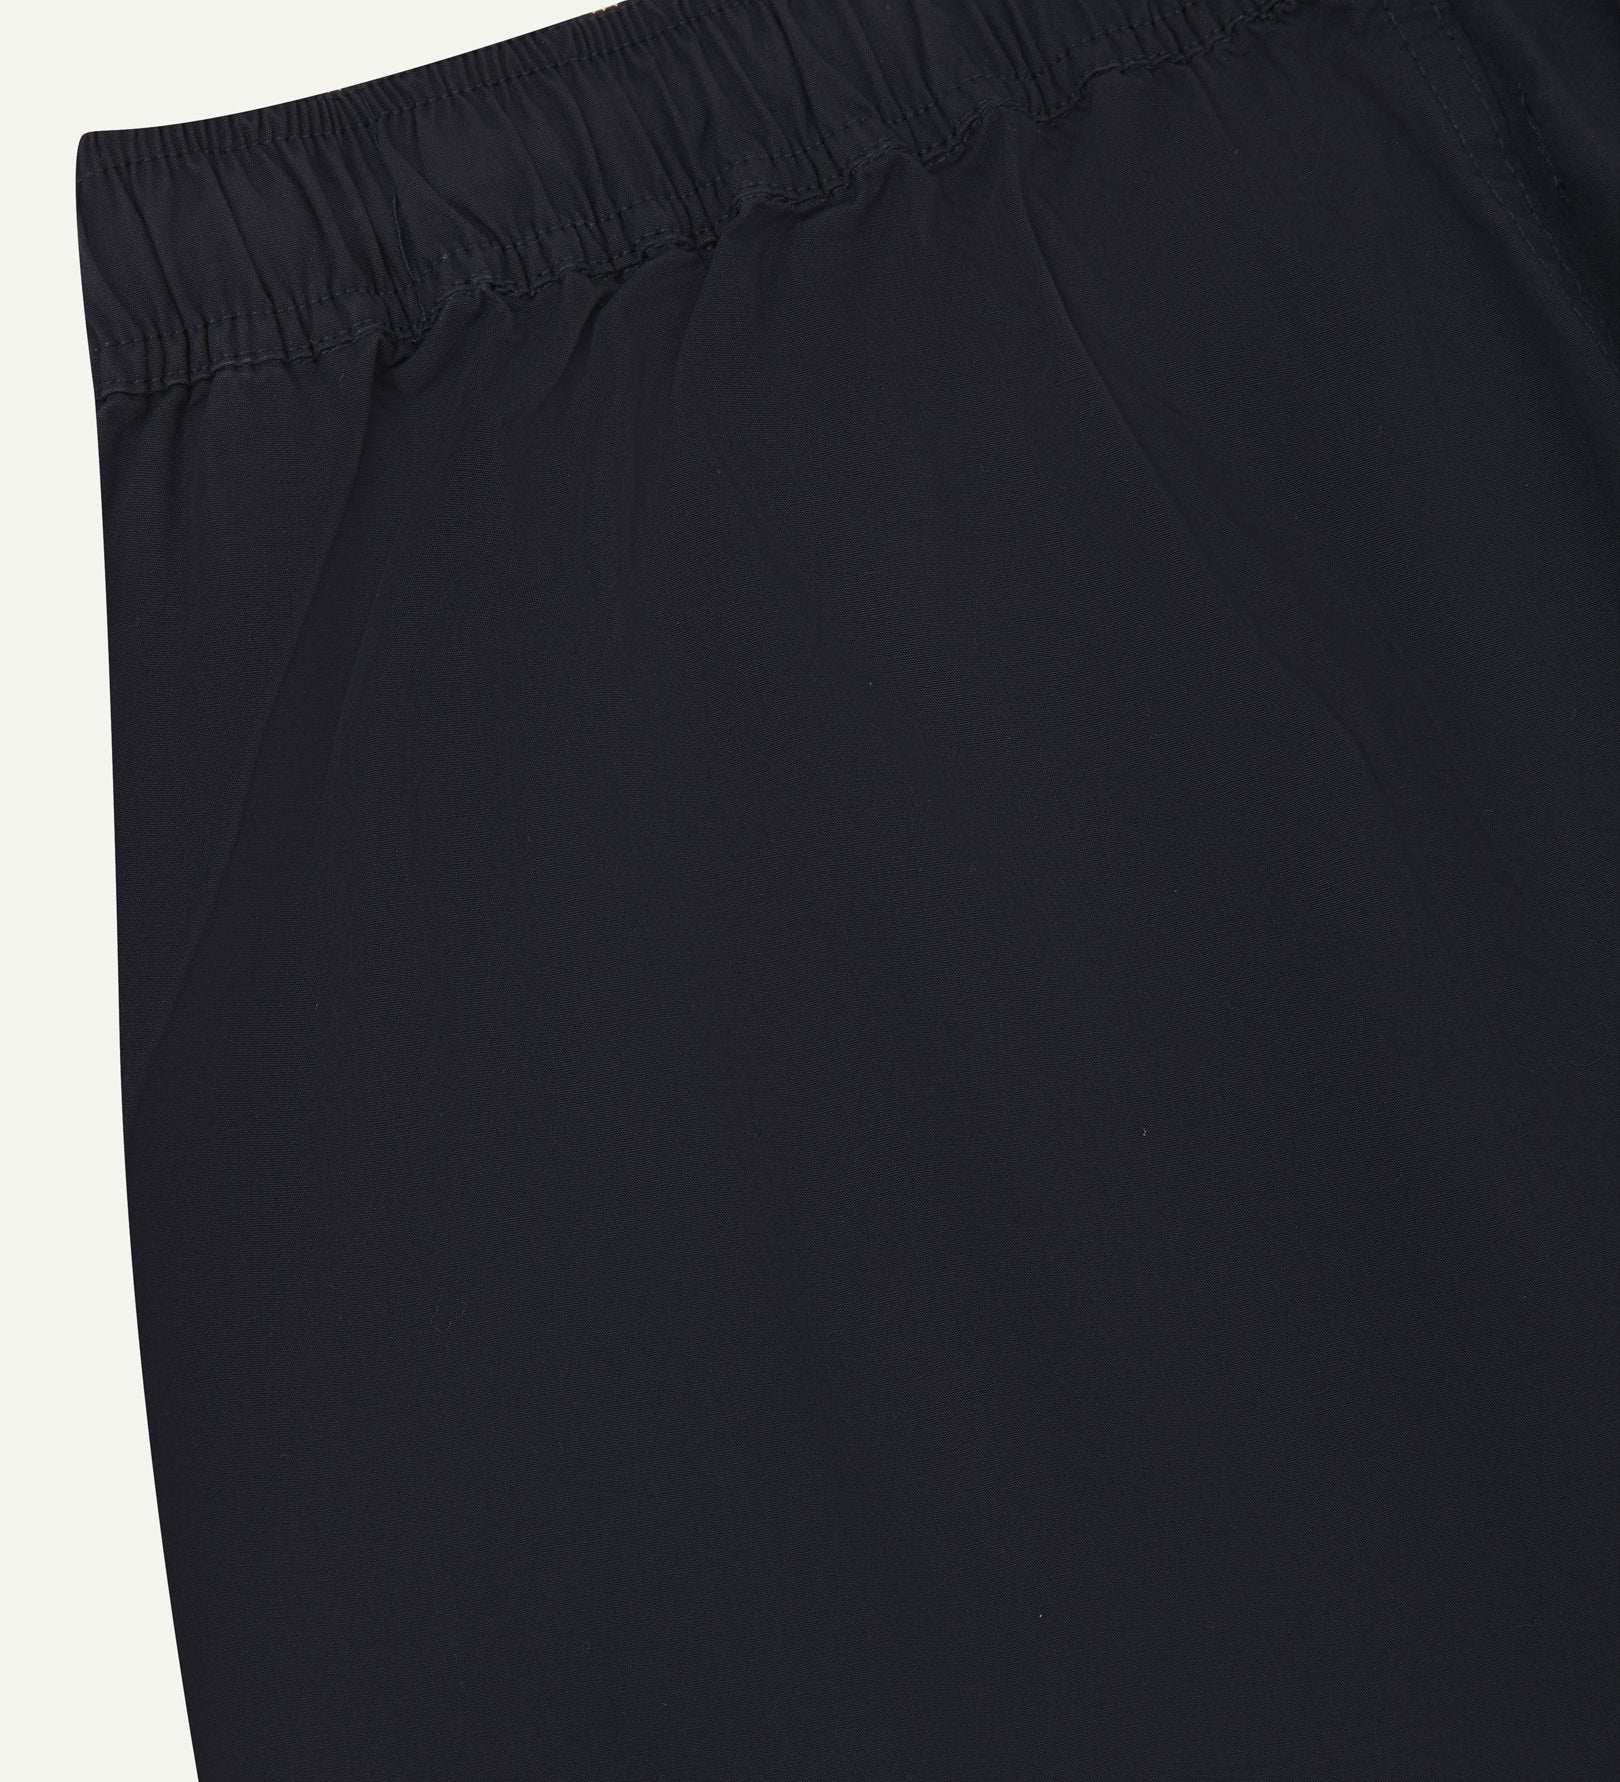 Back close-up shot of Uskees 5020 midnight blue lightweight utility pants showing elasticated waist.